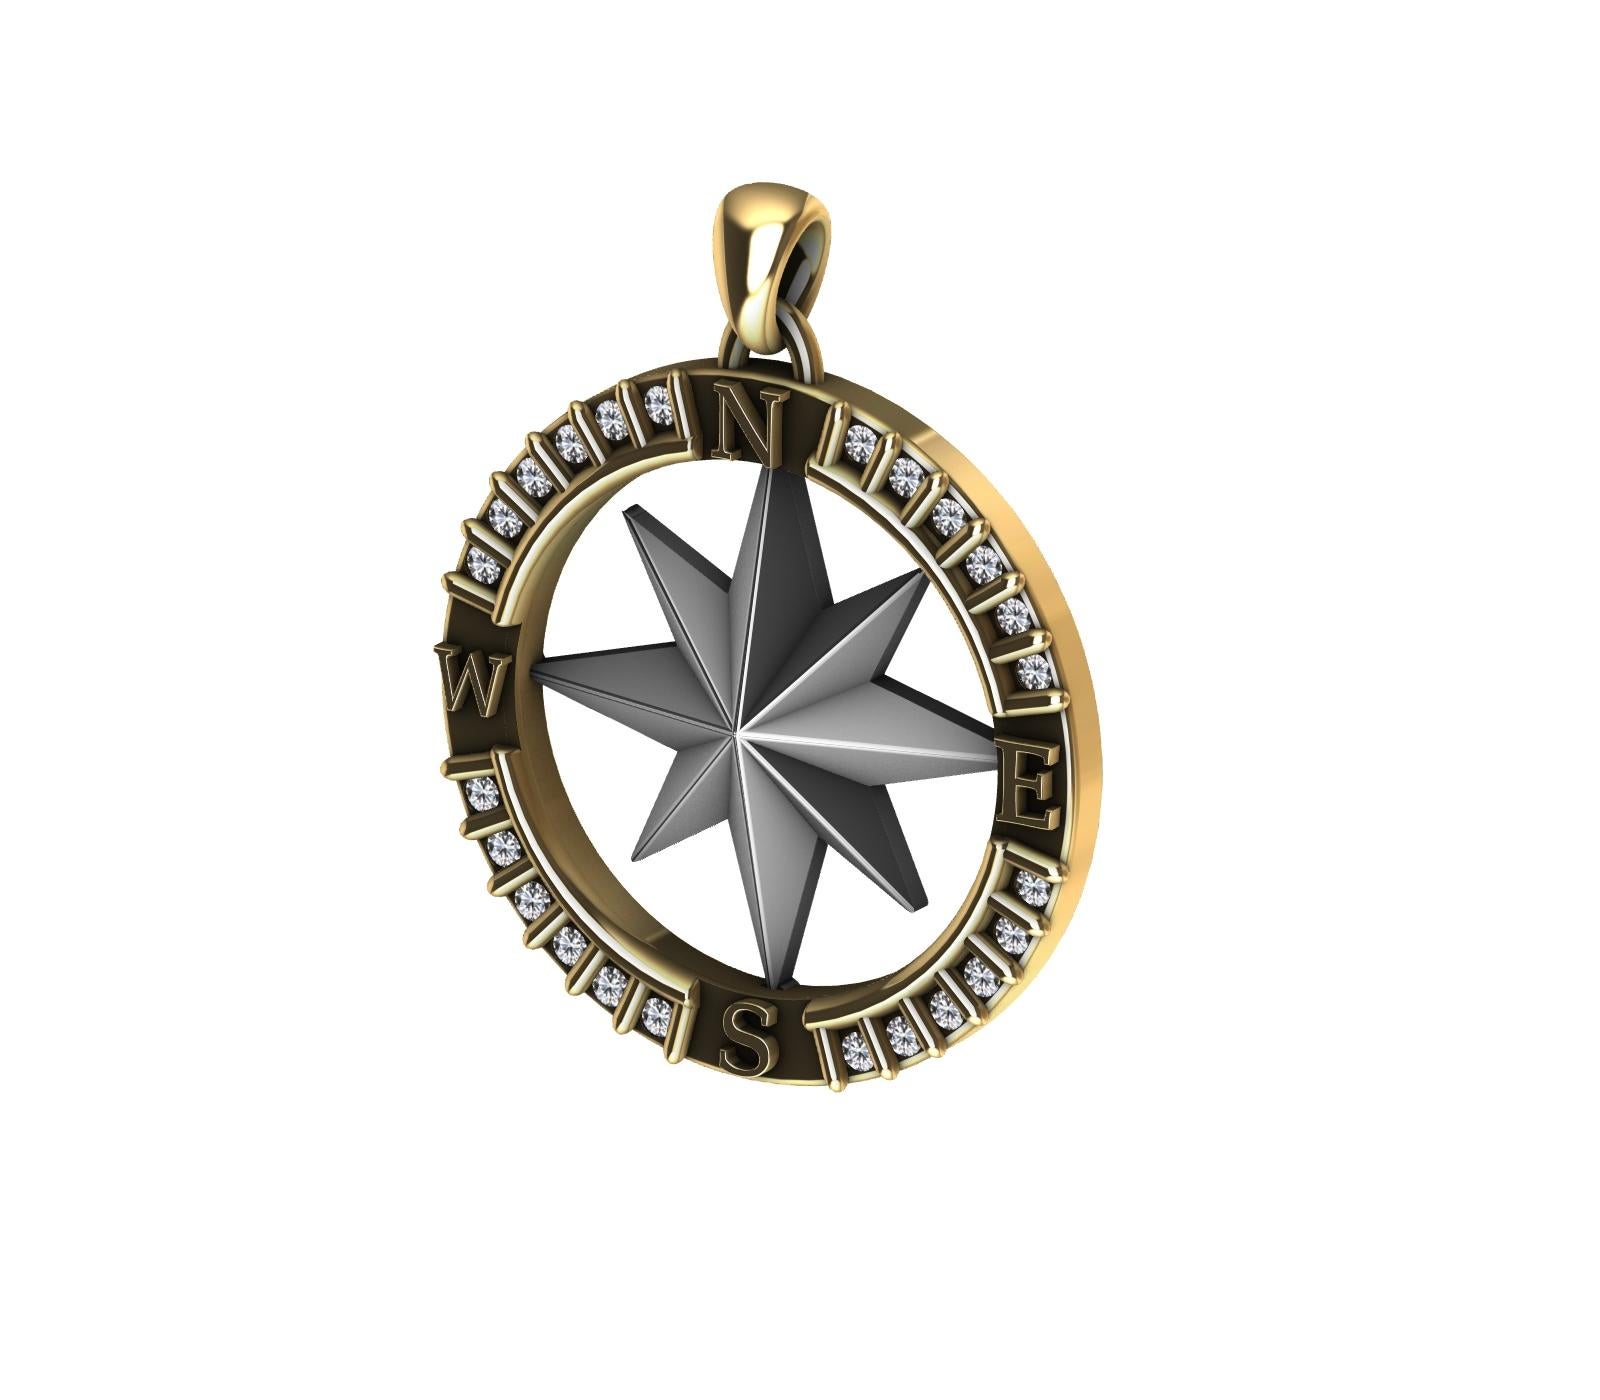  18 Karat Yellow Gold and Sterling Diamond Sailors Compass Pendant, For you water and wind lovers. Tiffany Designer , Thomas Kurilla has not forgotten you mates. Inspired from antique sailor's compasses. A sailing lover as well. Wear this and you'll